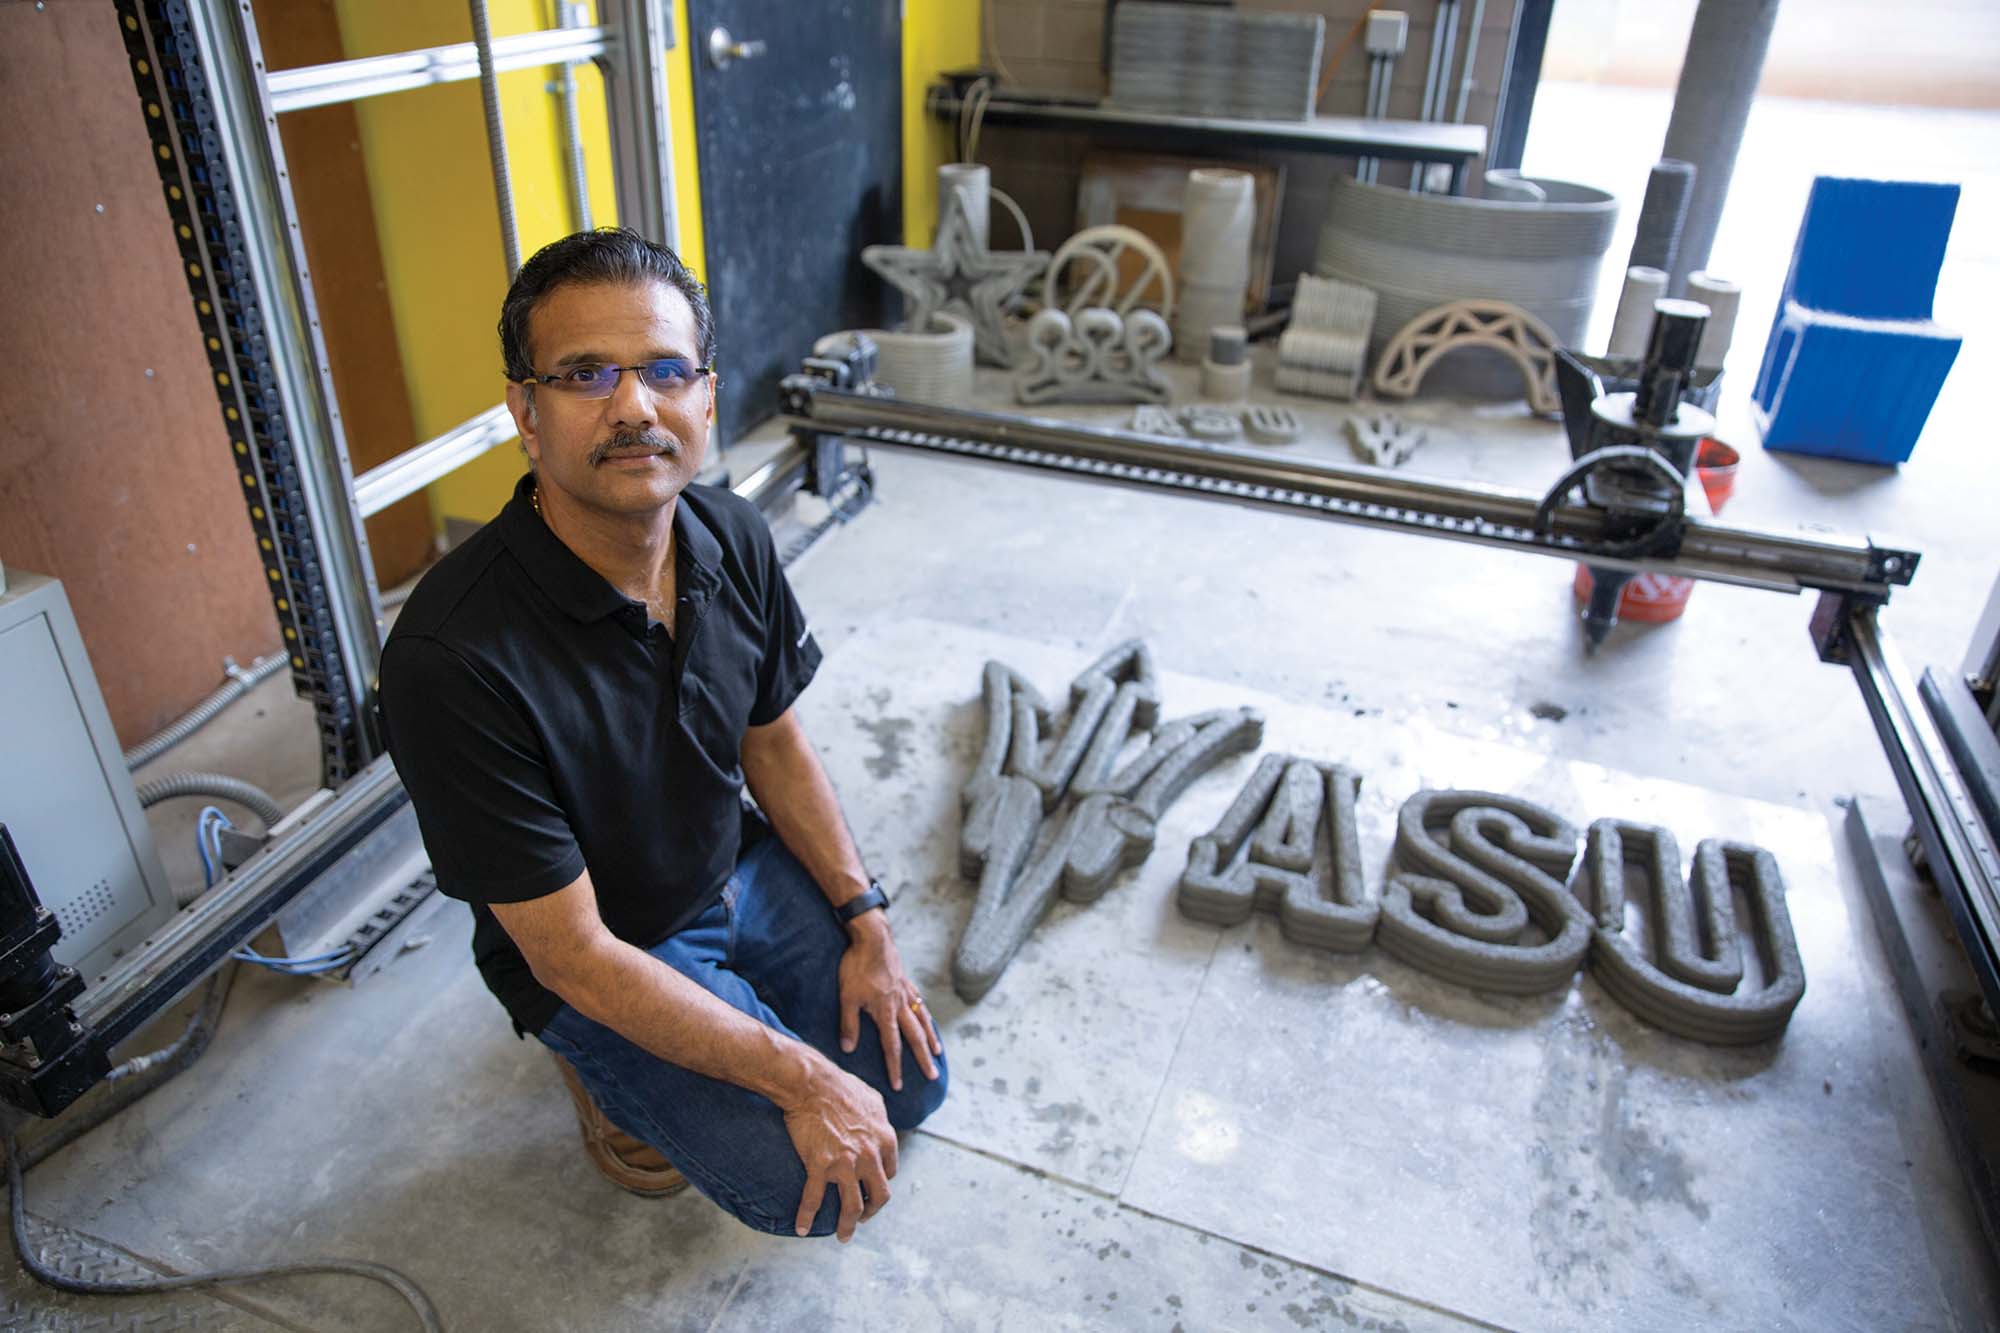 Fulton Professor of Structural Materials Narayanan Neithalath, wearing a black polo shirt and jeans, kneels next to a large, textured 3D print of the letters "ASU" with the pitchfork logo in a workshop.